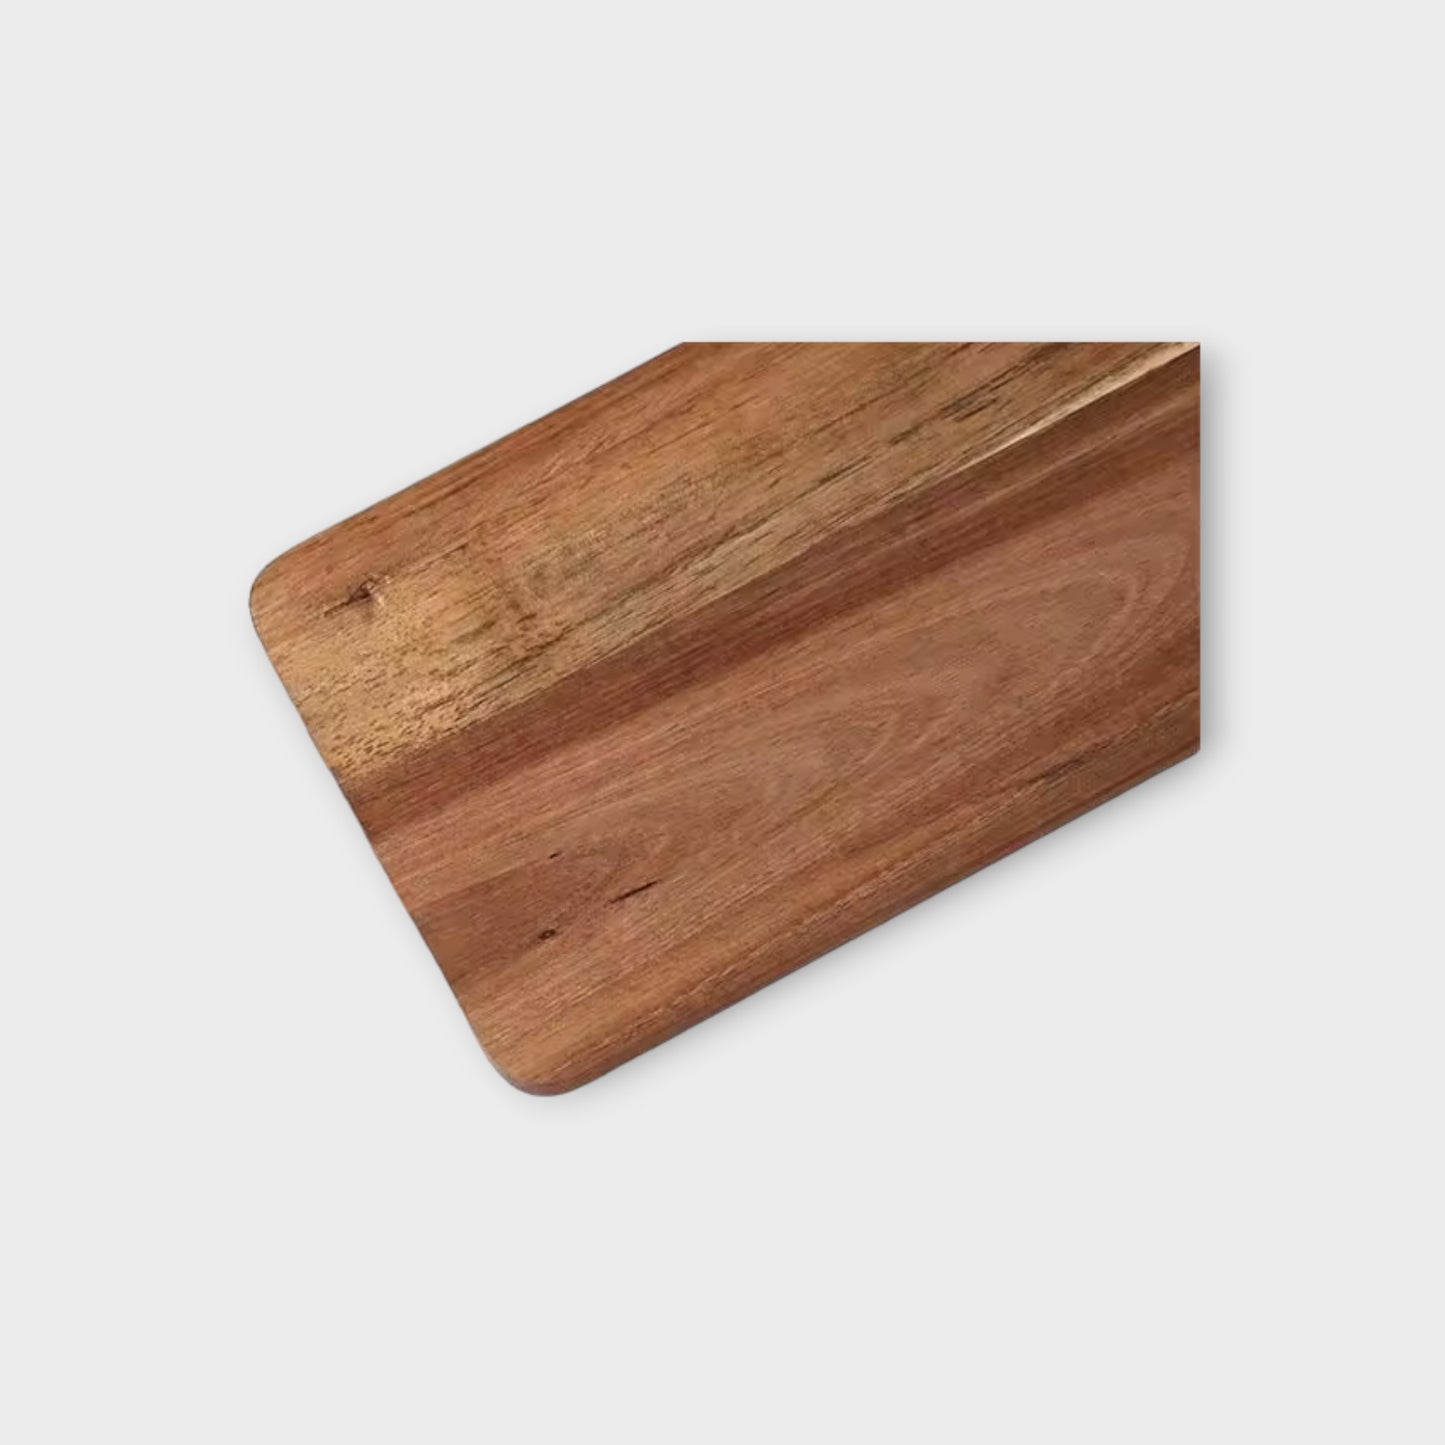 Cutting wood board with handle